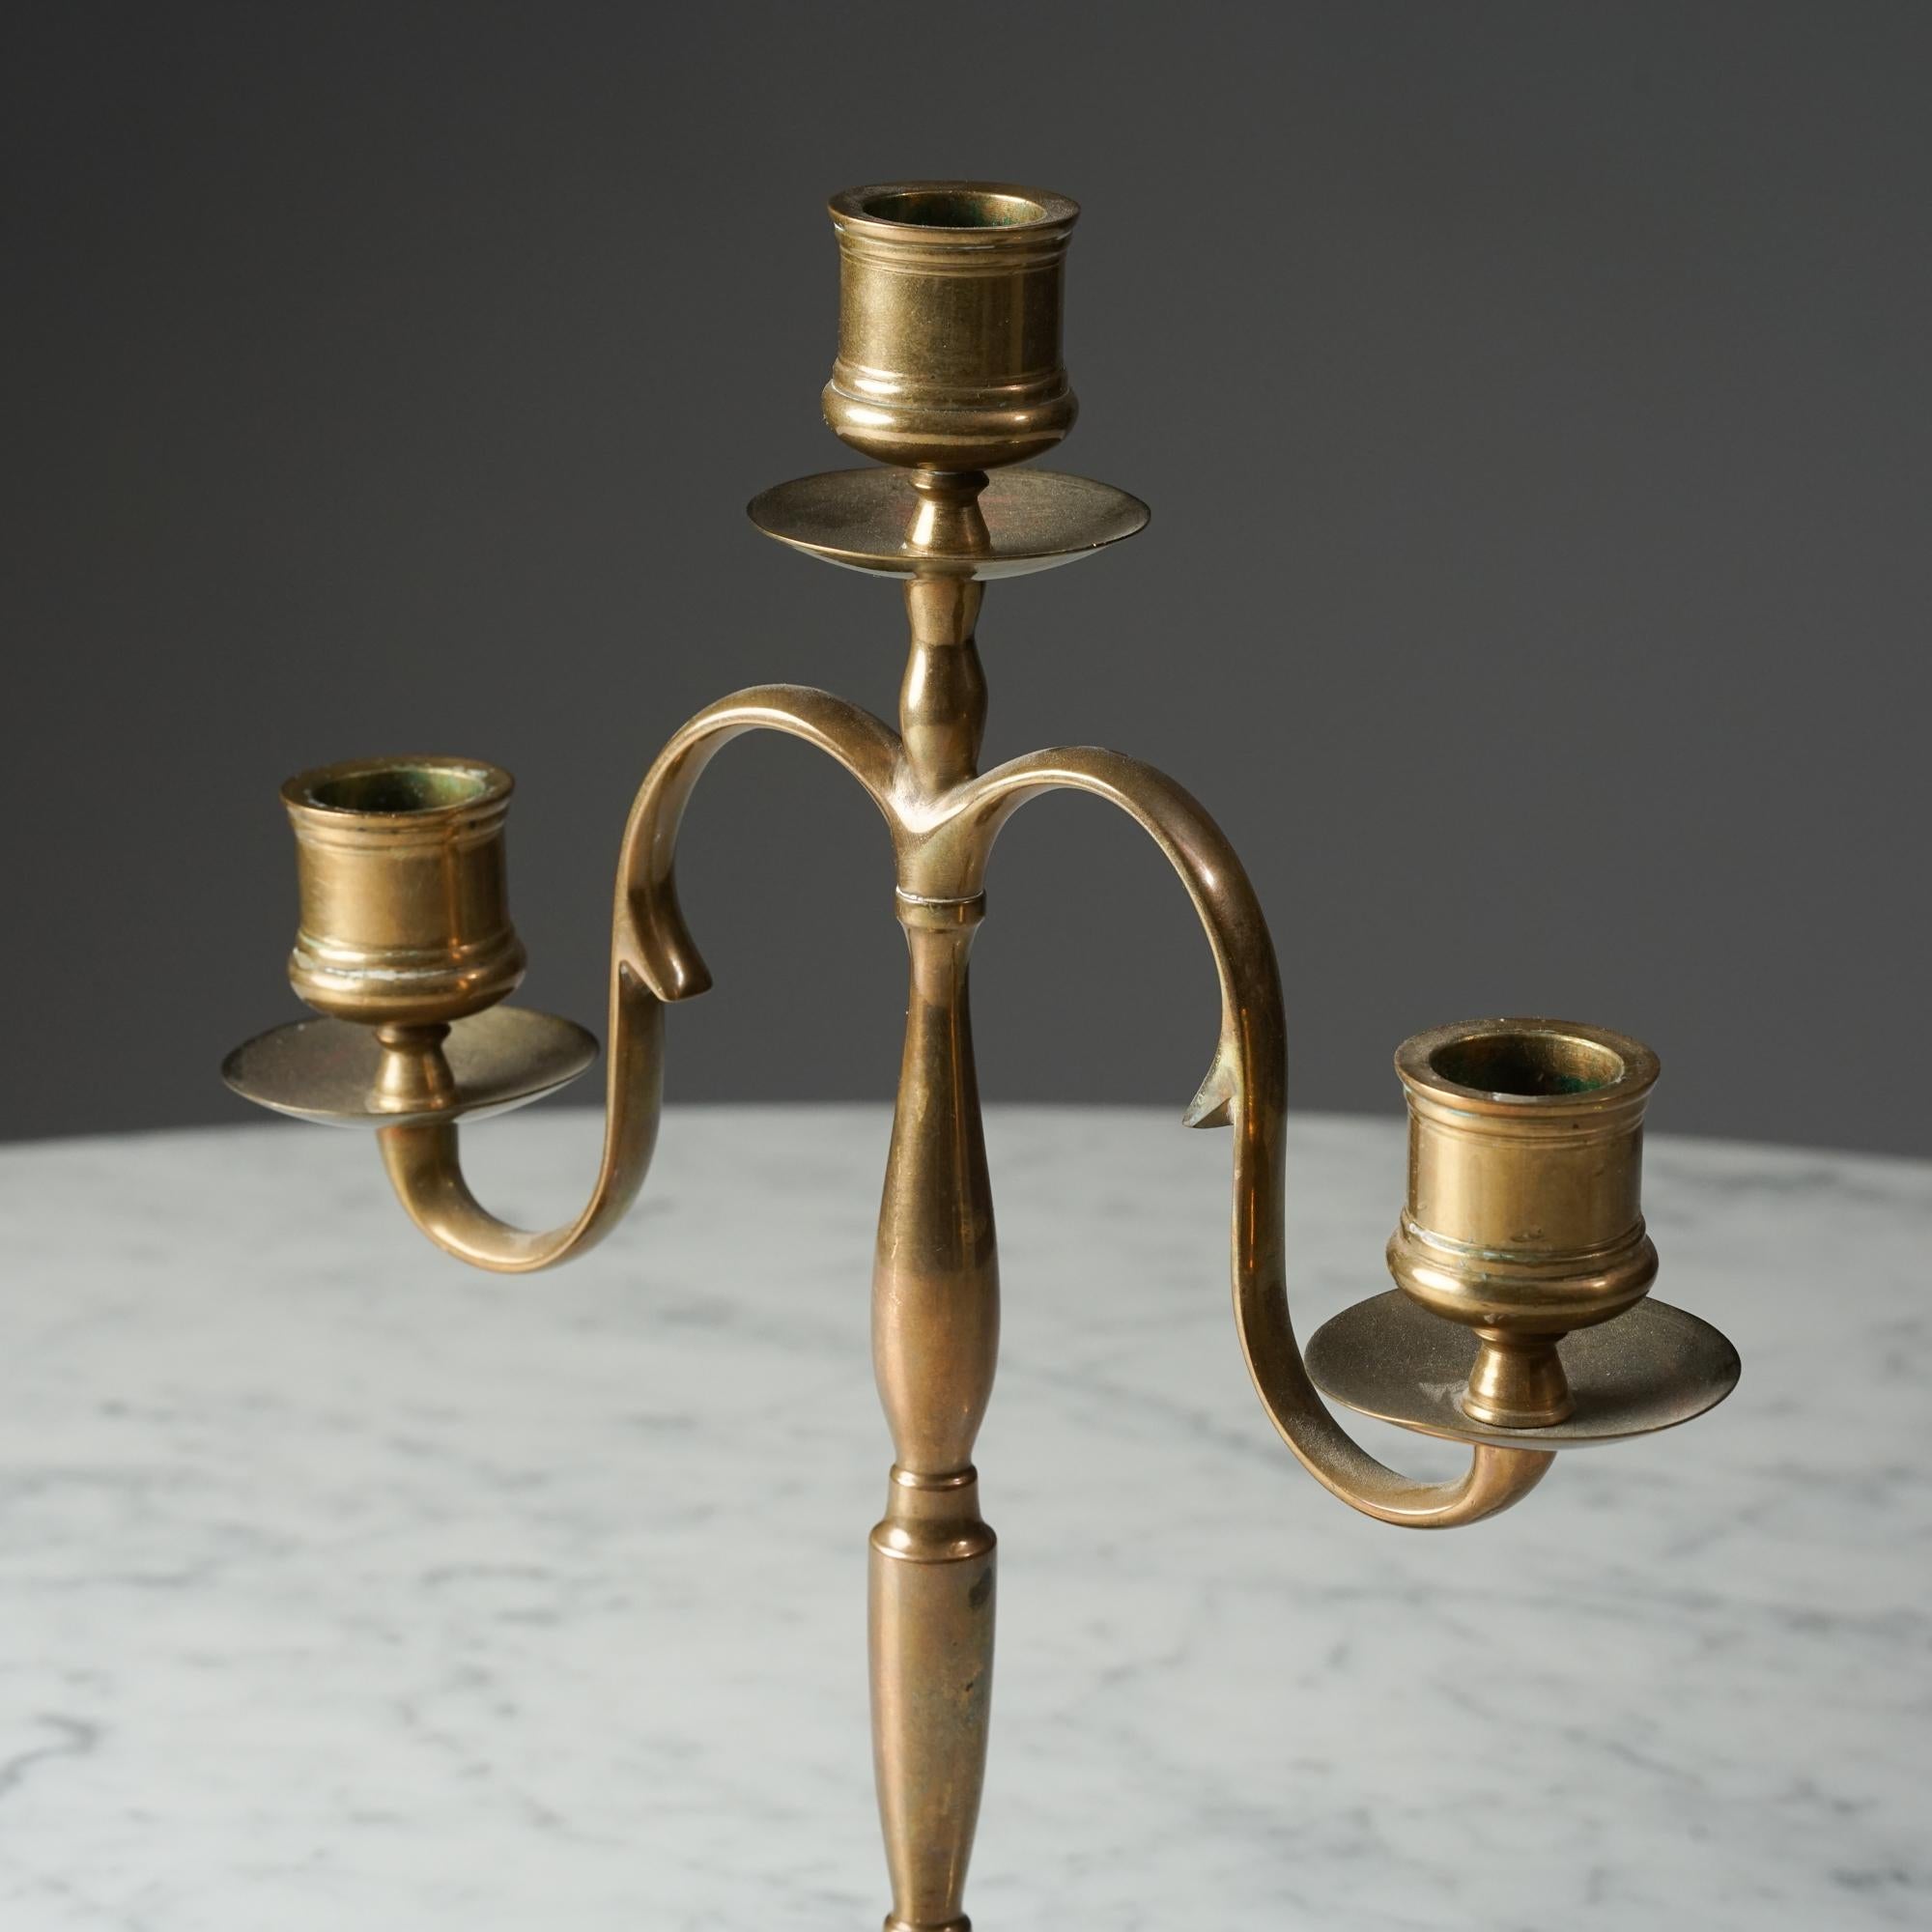 A Classic Paavo Tynell Bronze Candelabra

This small candelabra is a classic design by Finnish architect and designer Paavo Tynell. It was made in Finland by Taito Oy in the 1920s or 1930s.

The candelabra is made of brass and features a simple,